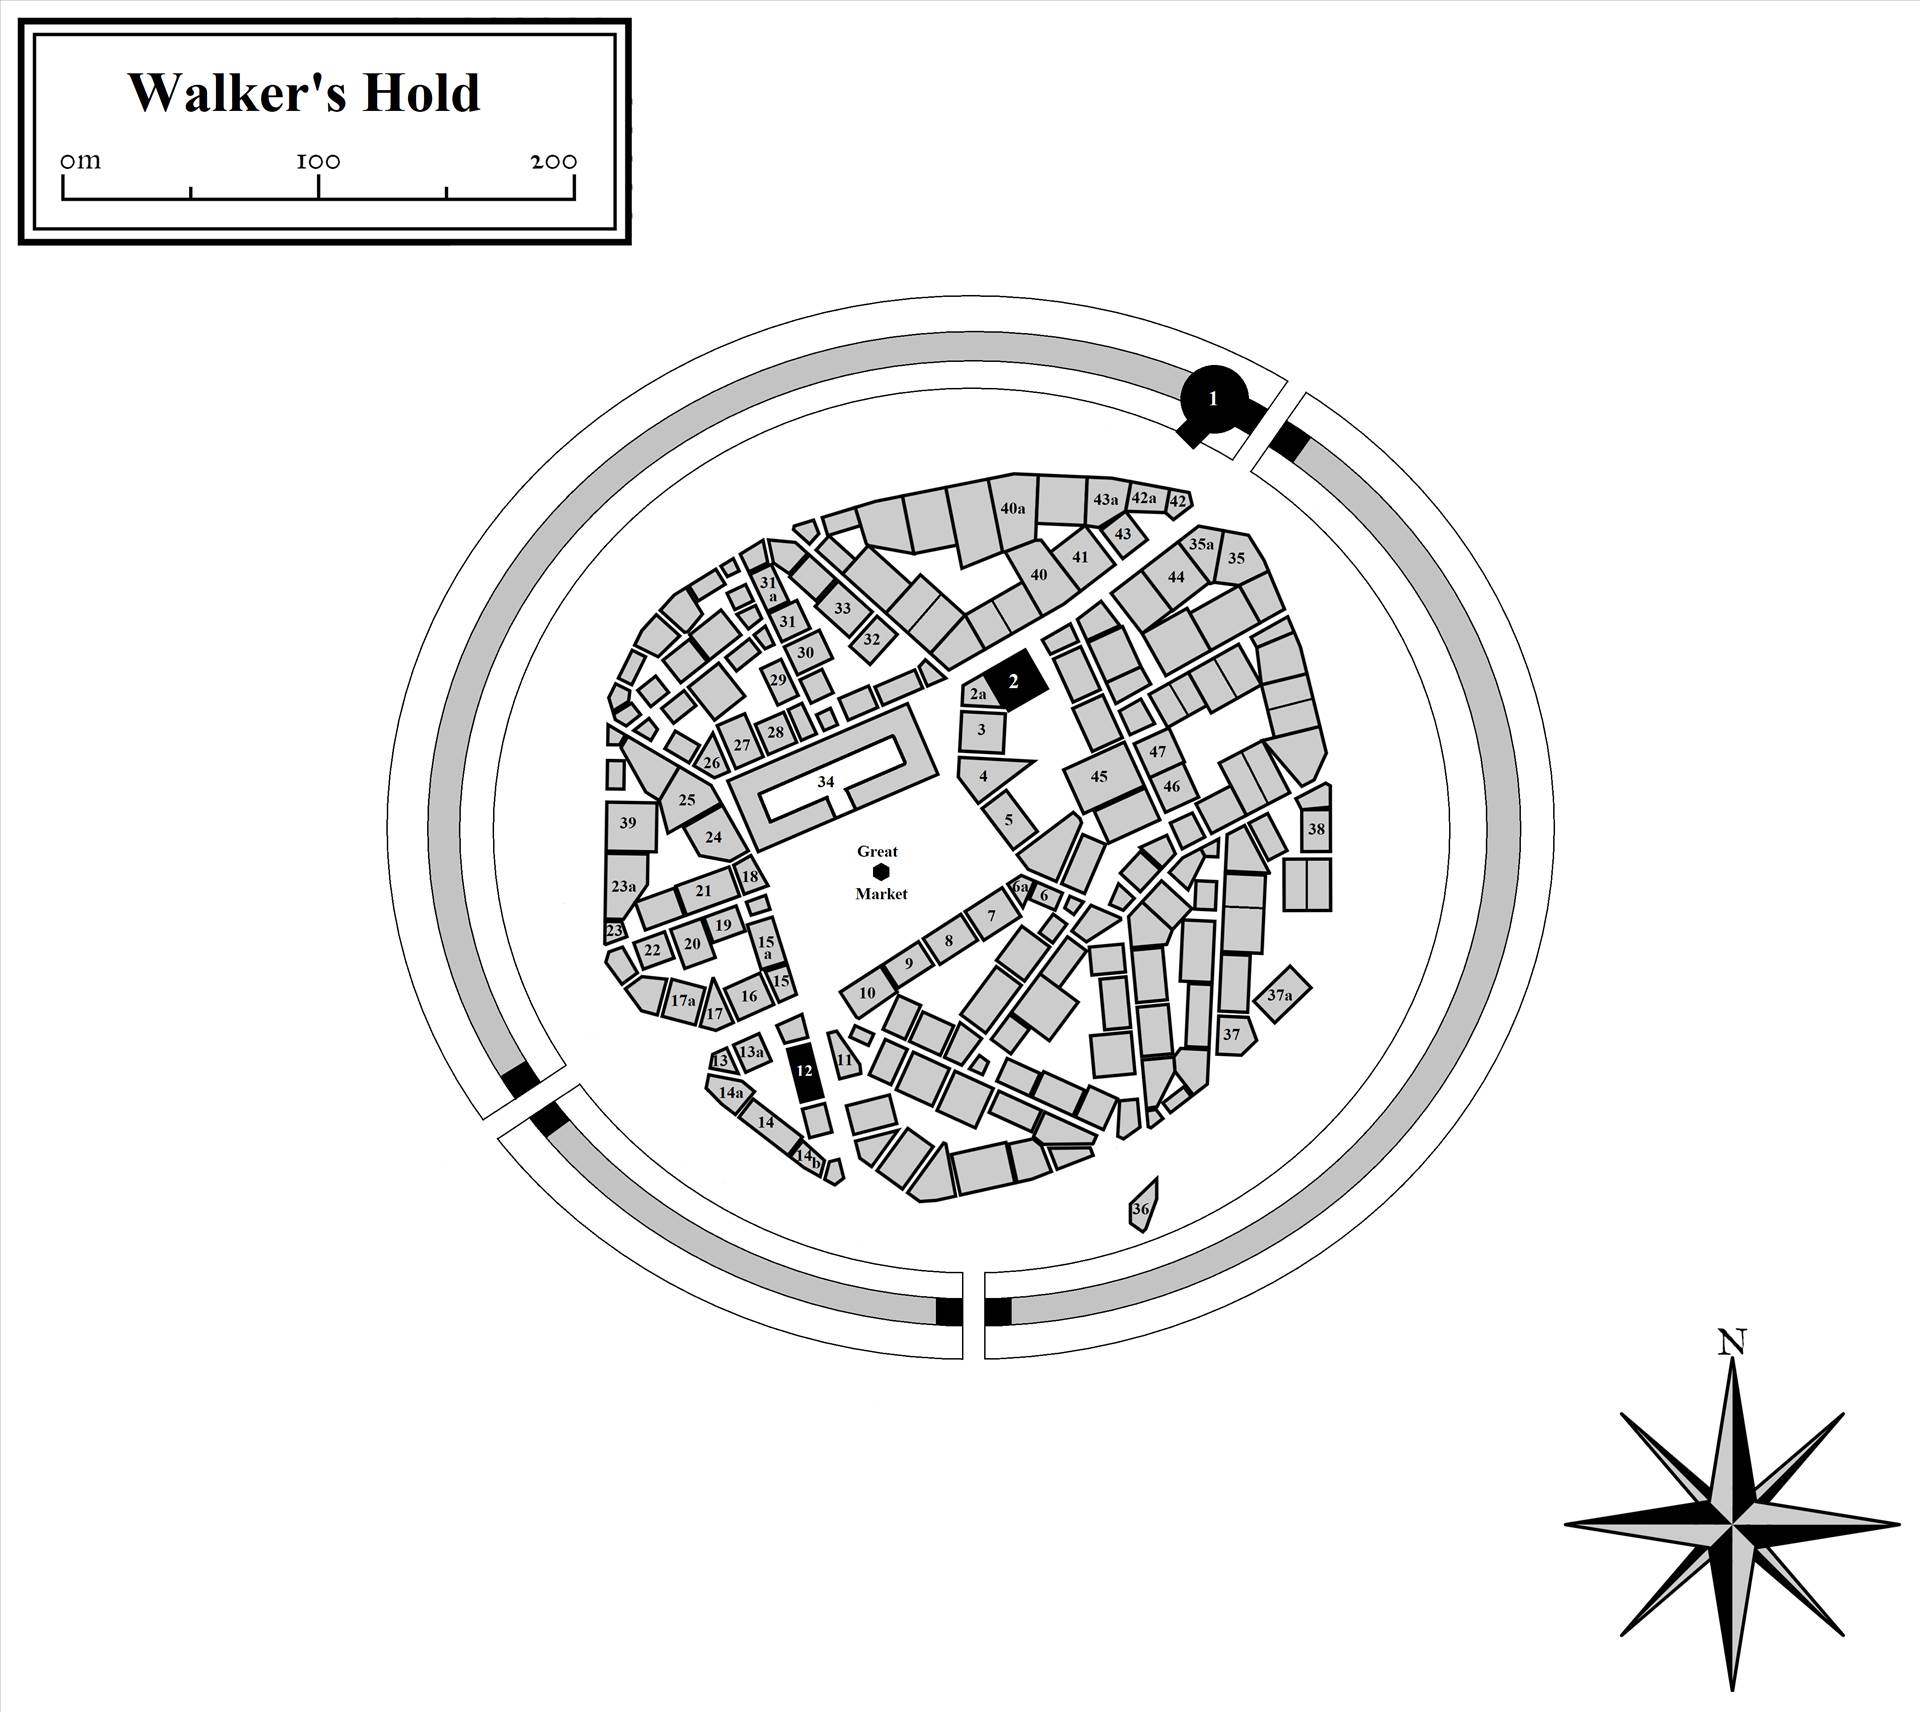 New Walker's Hold WIP 1.2.png  by Dalor Darden